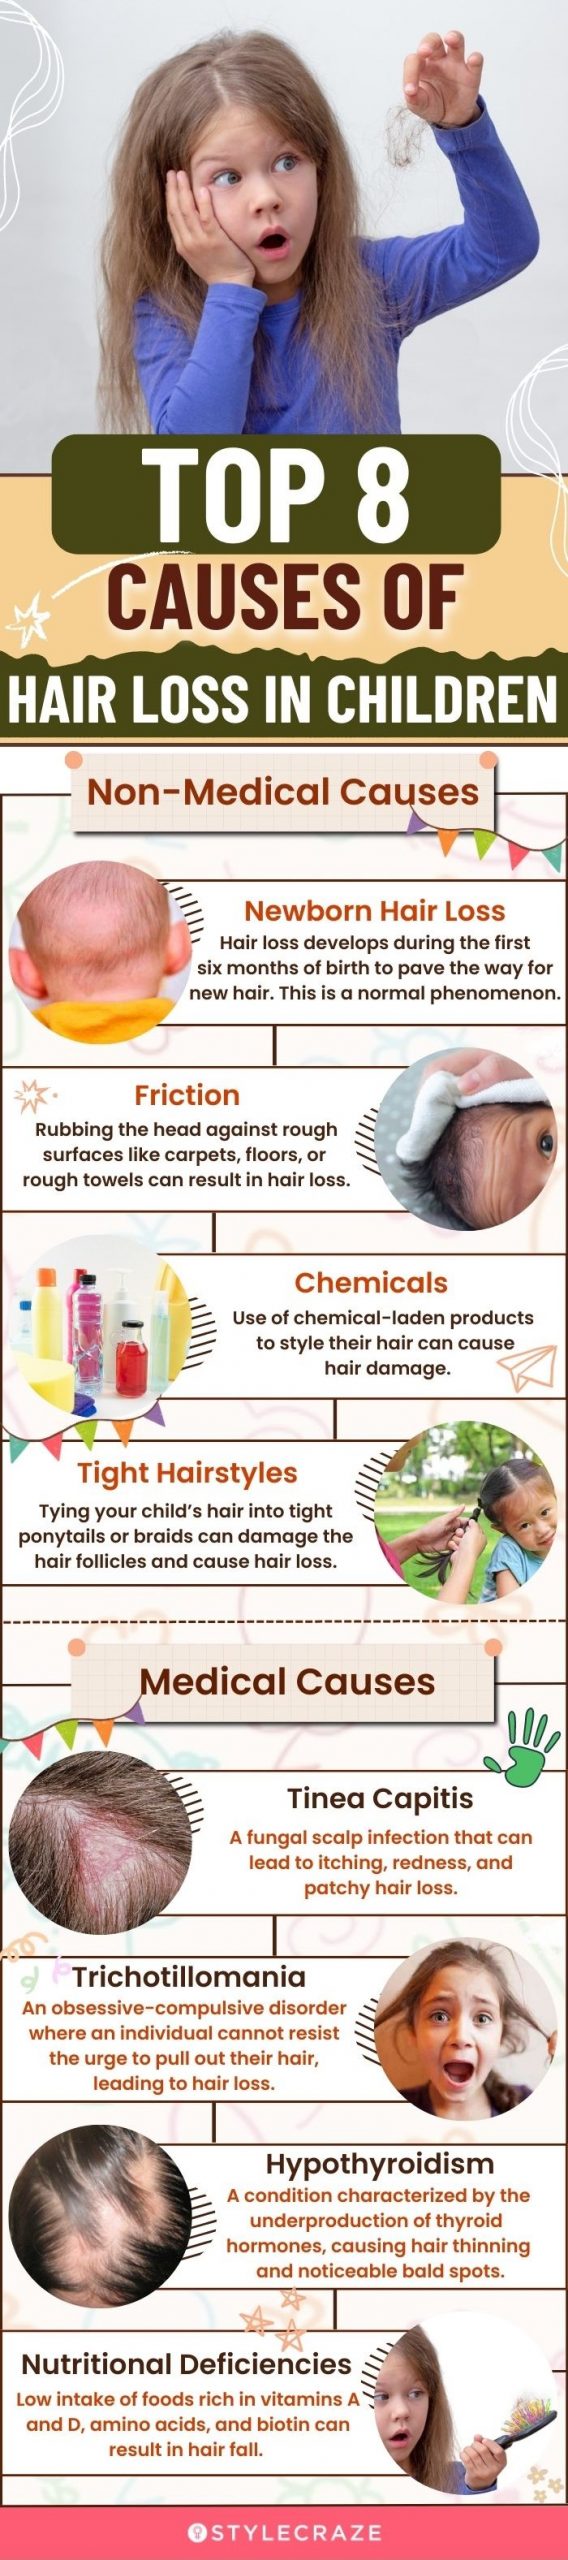 top 8 causes of hair loss in children (infographic)